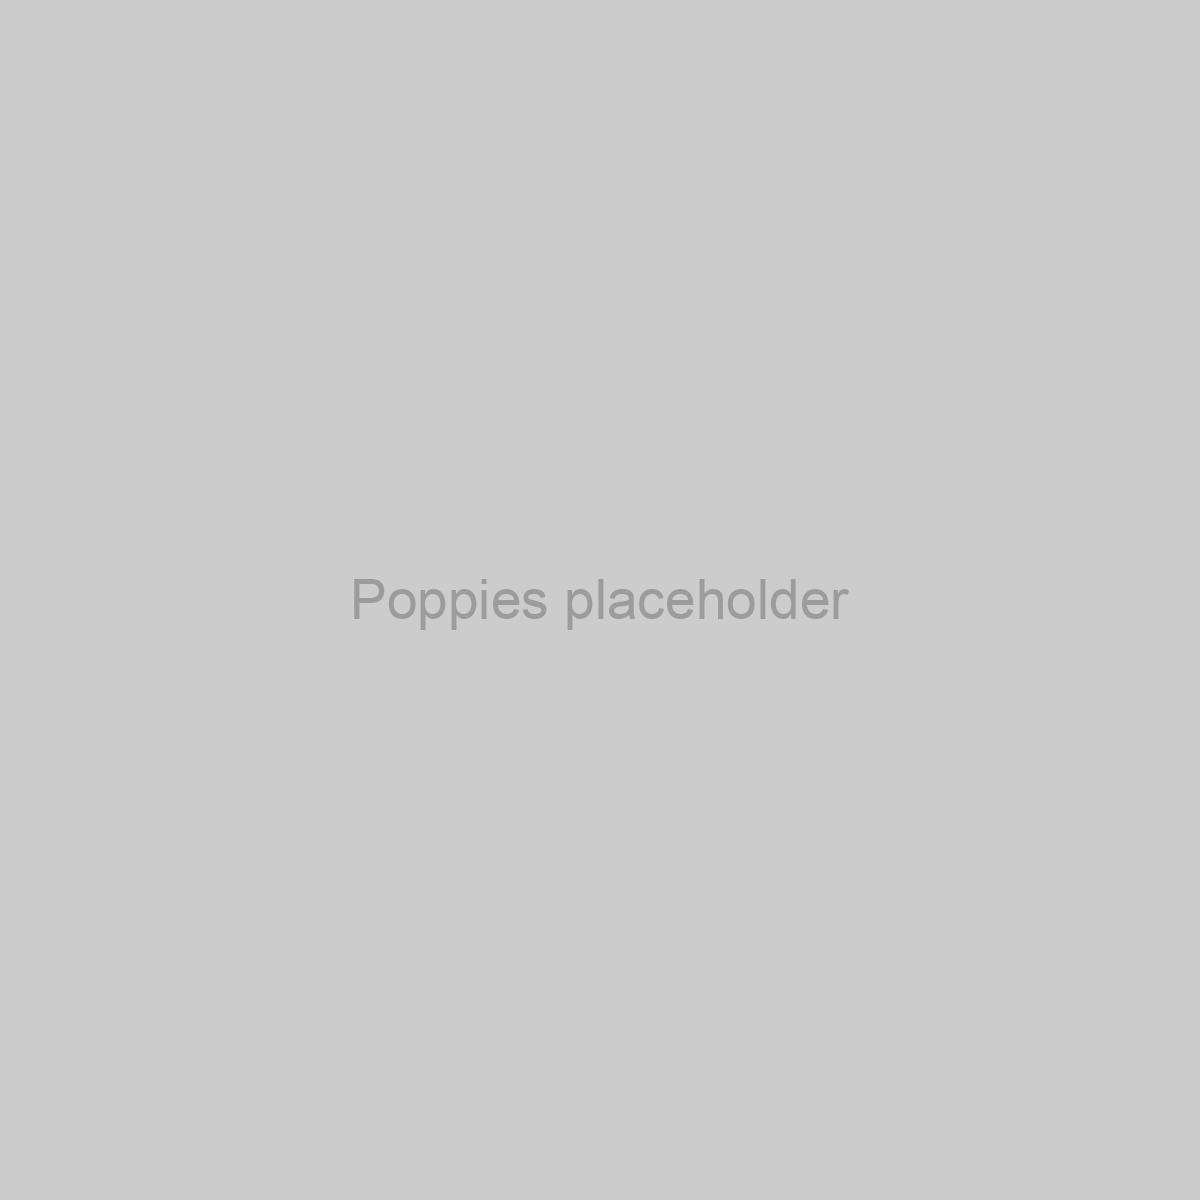 Poppies Placeholder Image